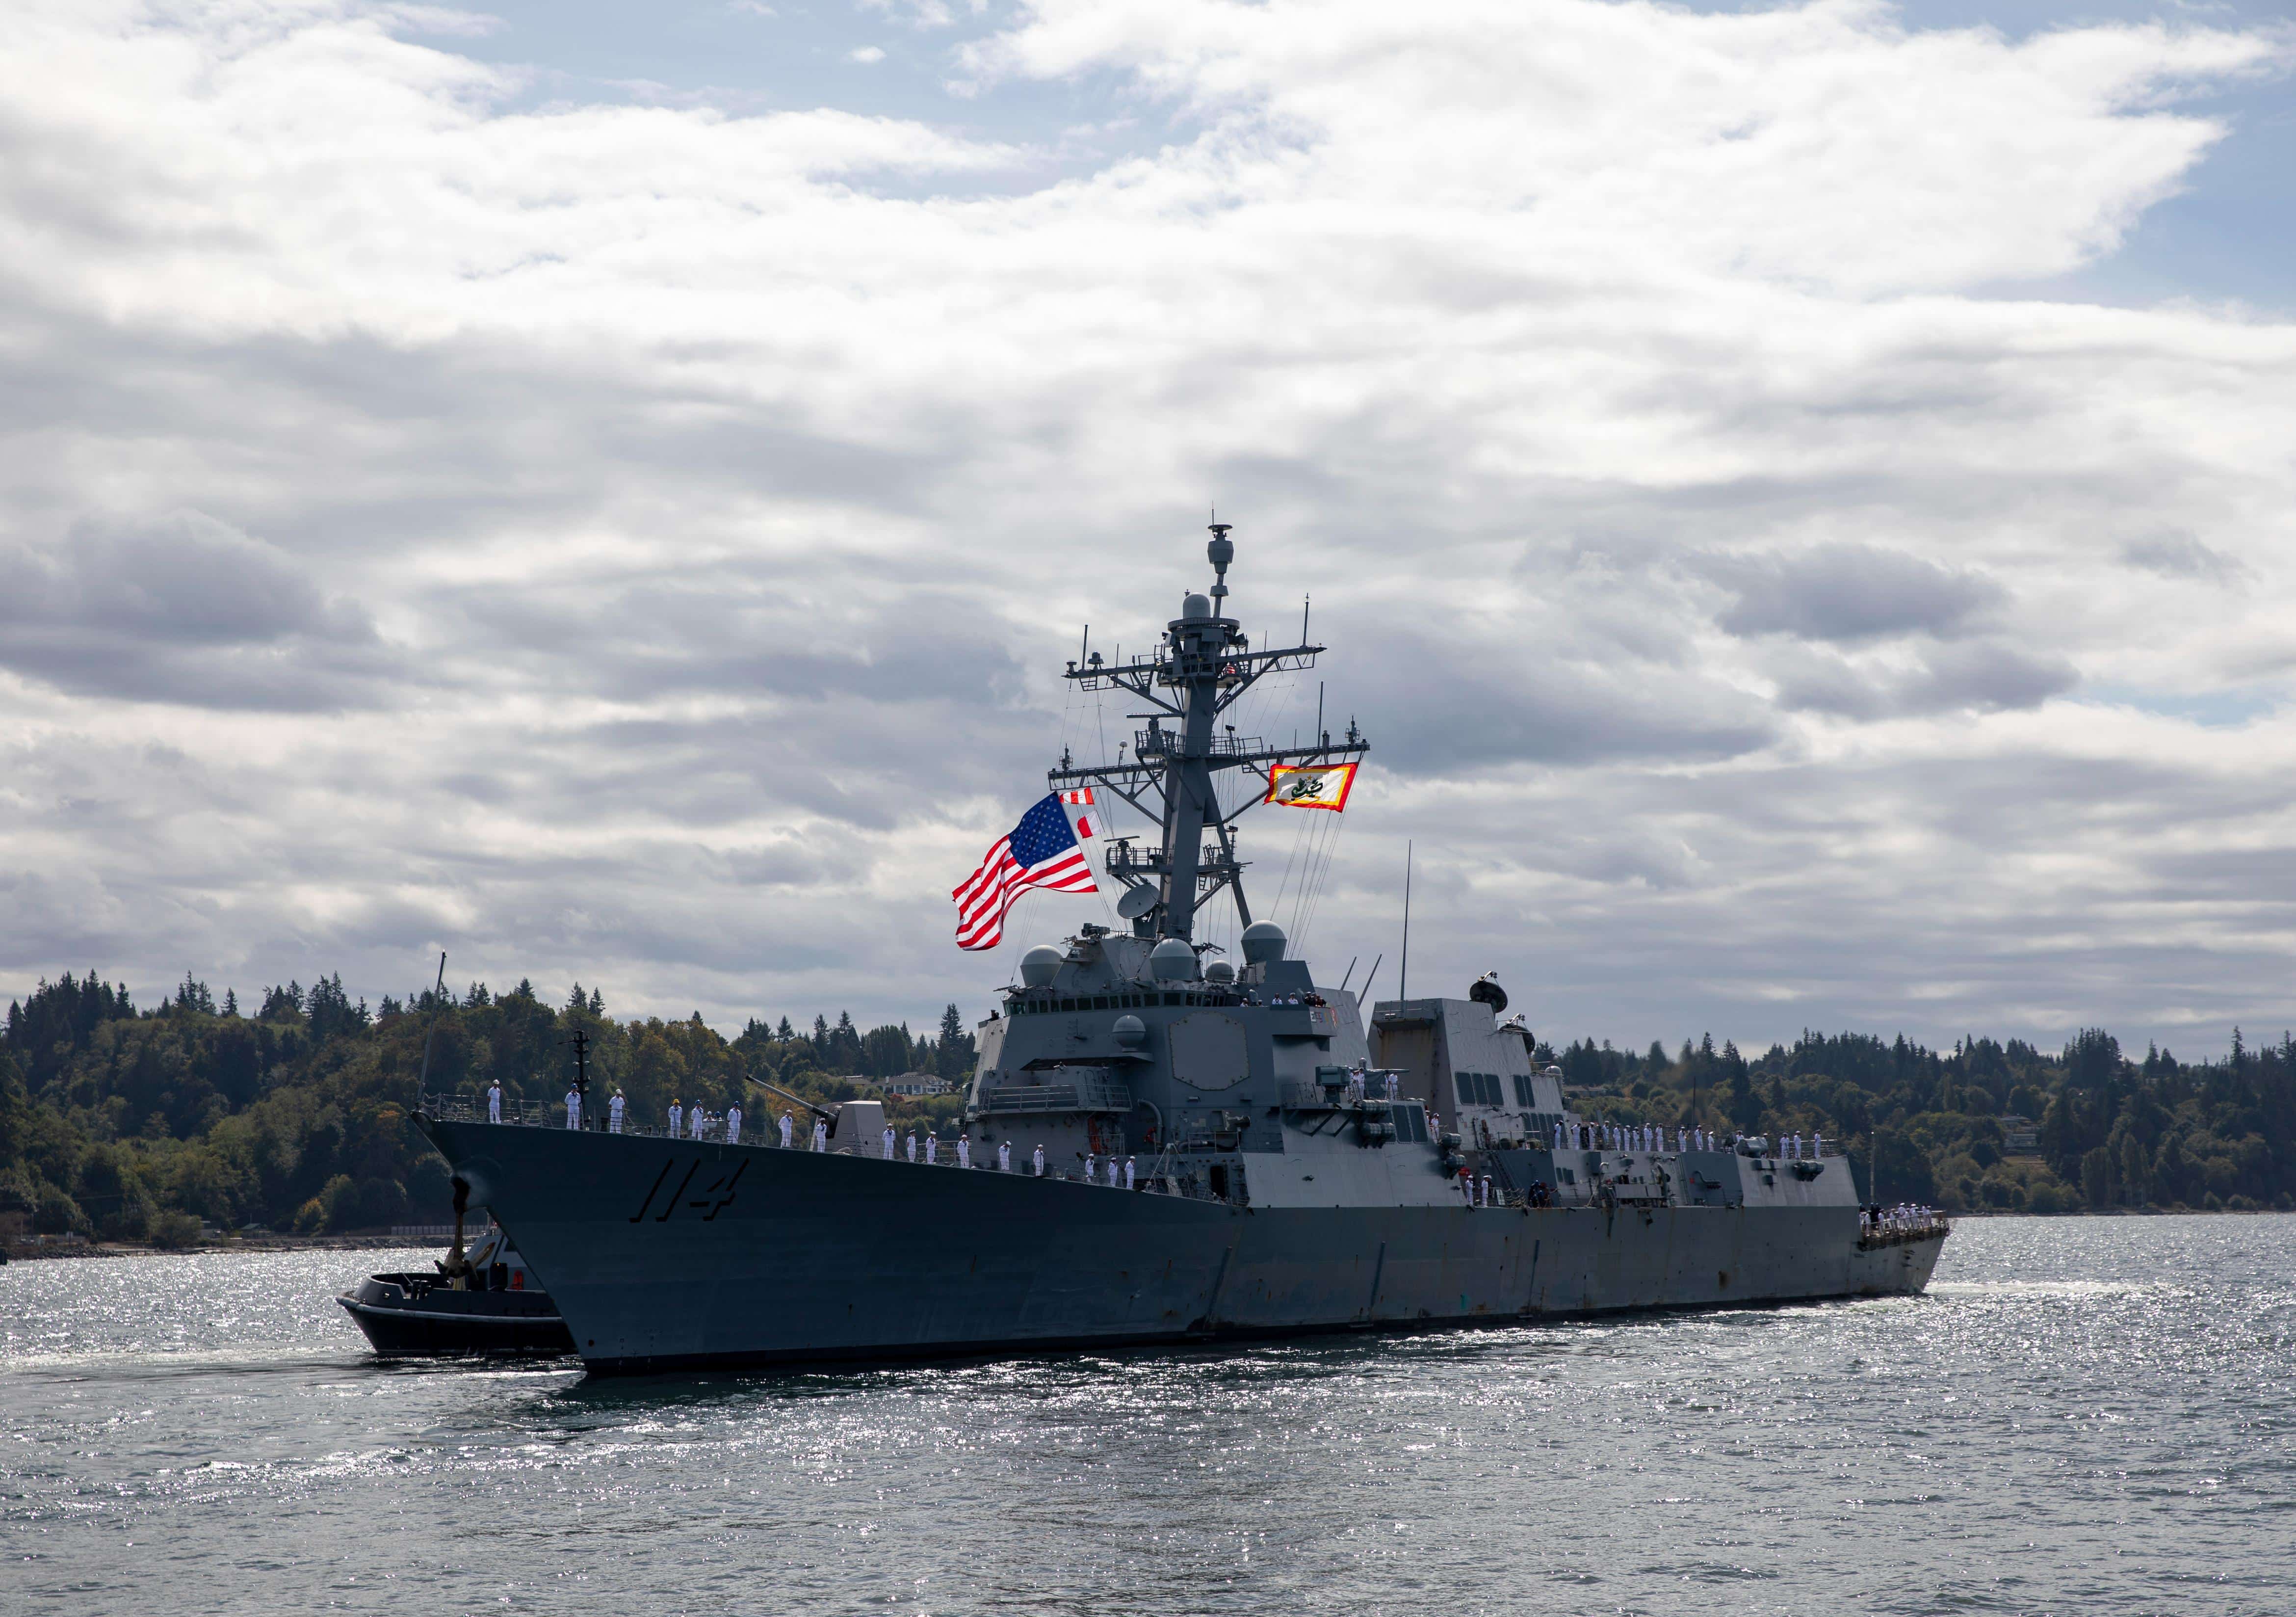 The Arleigh Burke-class guided-missile destroyer USS Ralph Johnson (DDG 114) departs Naval Station Everett, Sep. 15, 2021. The ship will forward-deploy to Japan to replace the guided-missile destroyer USS Mustin (DDG 89) that is scheduled for overhaul maintenance. (U.S. Navy photo by Mass Communication Specialist 2nd Class Ethan Soto)